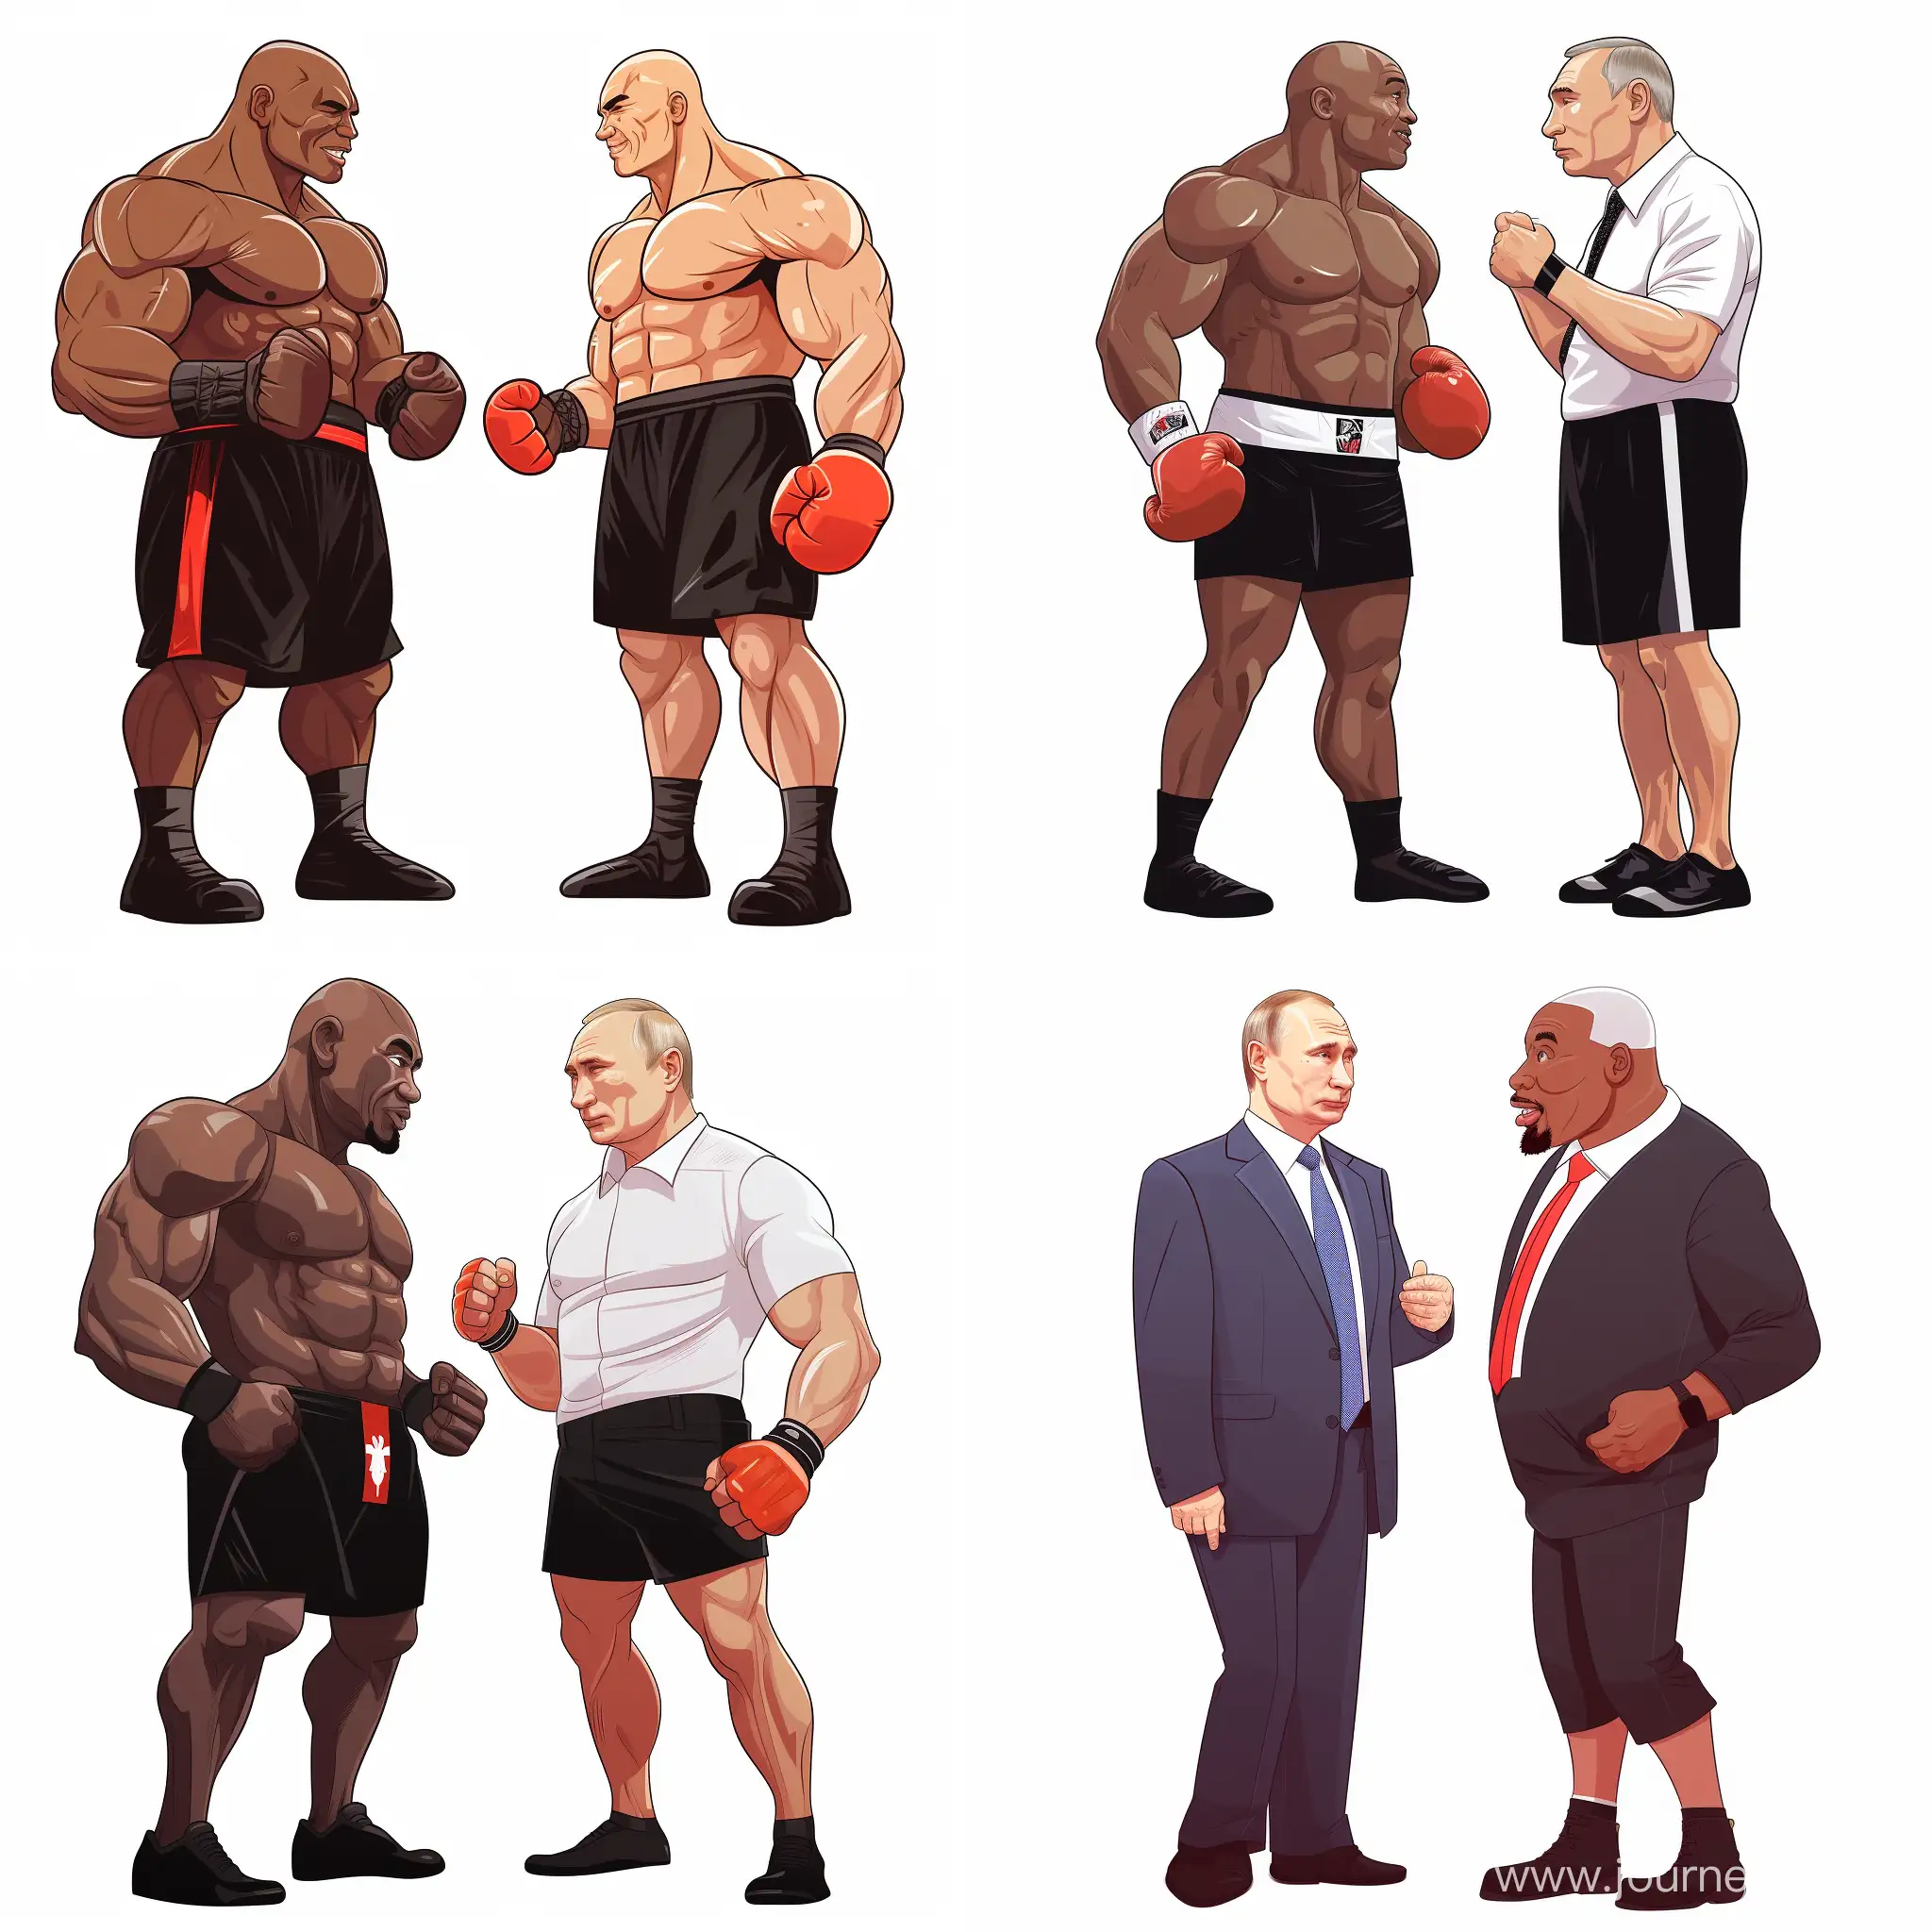 Mike-Tyson-Conversing-with-Putin-in-Cartoon-Style